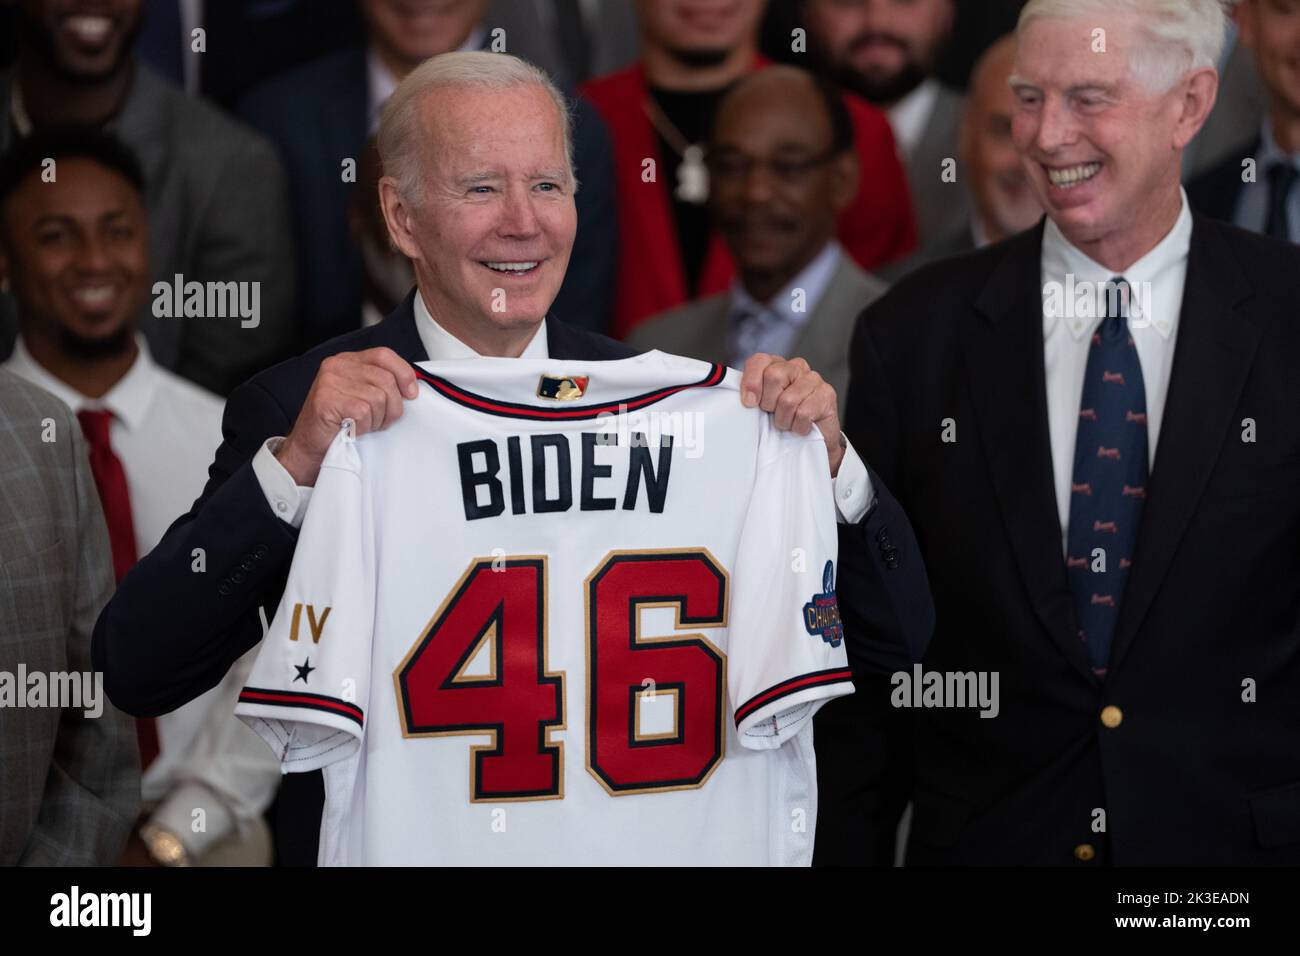 Washington, United States. 26th Sep, 2022. United States President Joe Biden poses for photos with a team jersey presented to him during a ceremony welcoming the Atlanta Braves to the White House in Washington, DC to celebrate their 2021 World Series championship, September 26, 2022. Photo by Chris Kleponis/UPI Credit: UPI/Alamy Live News Stock Photo